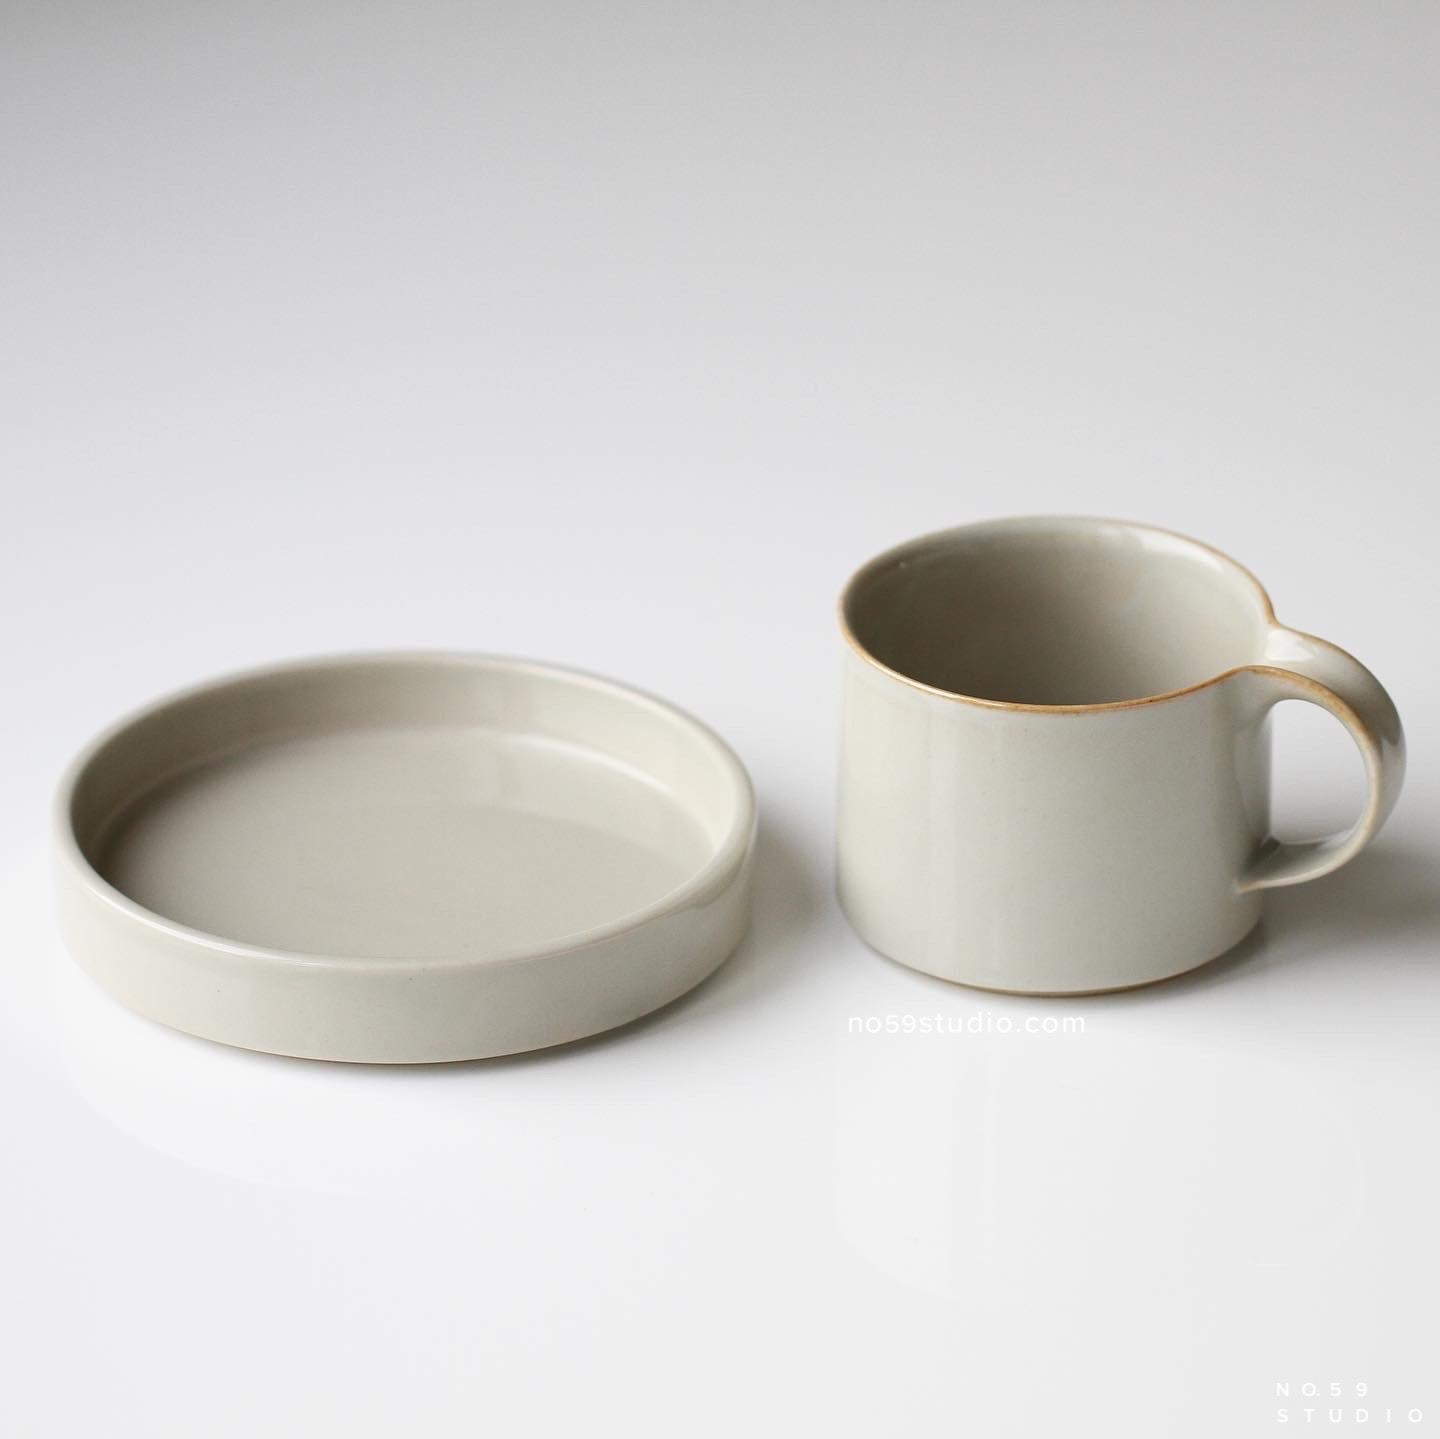 Moderato Cup and Saucer